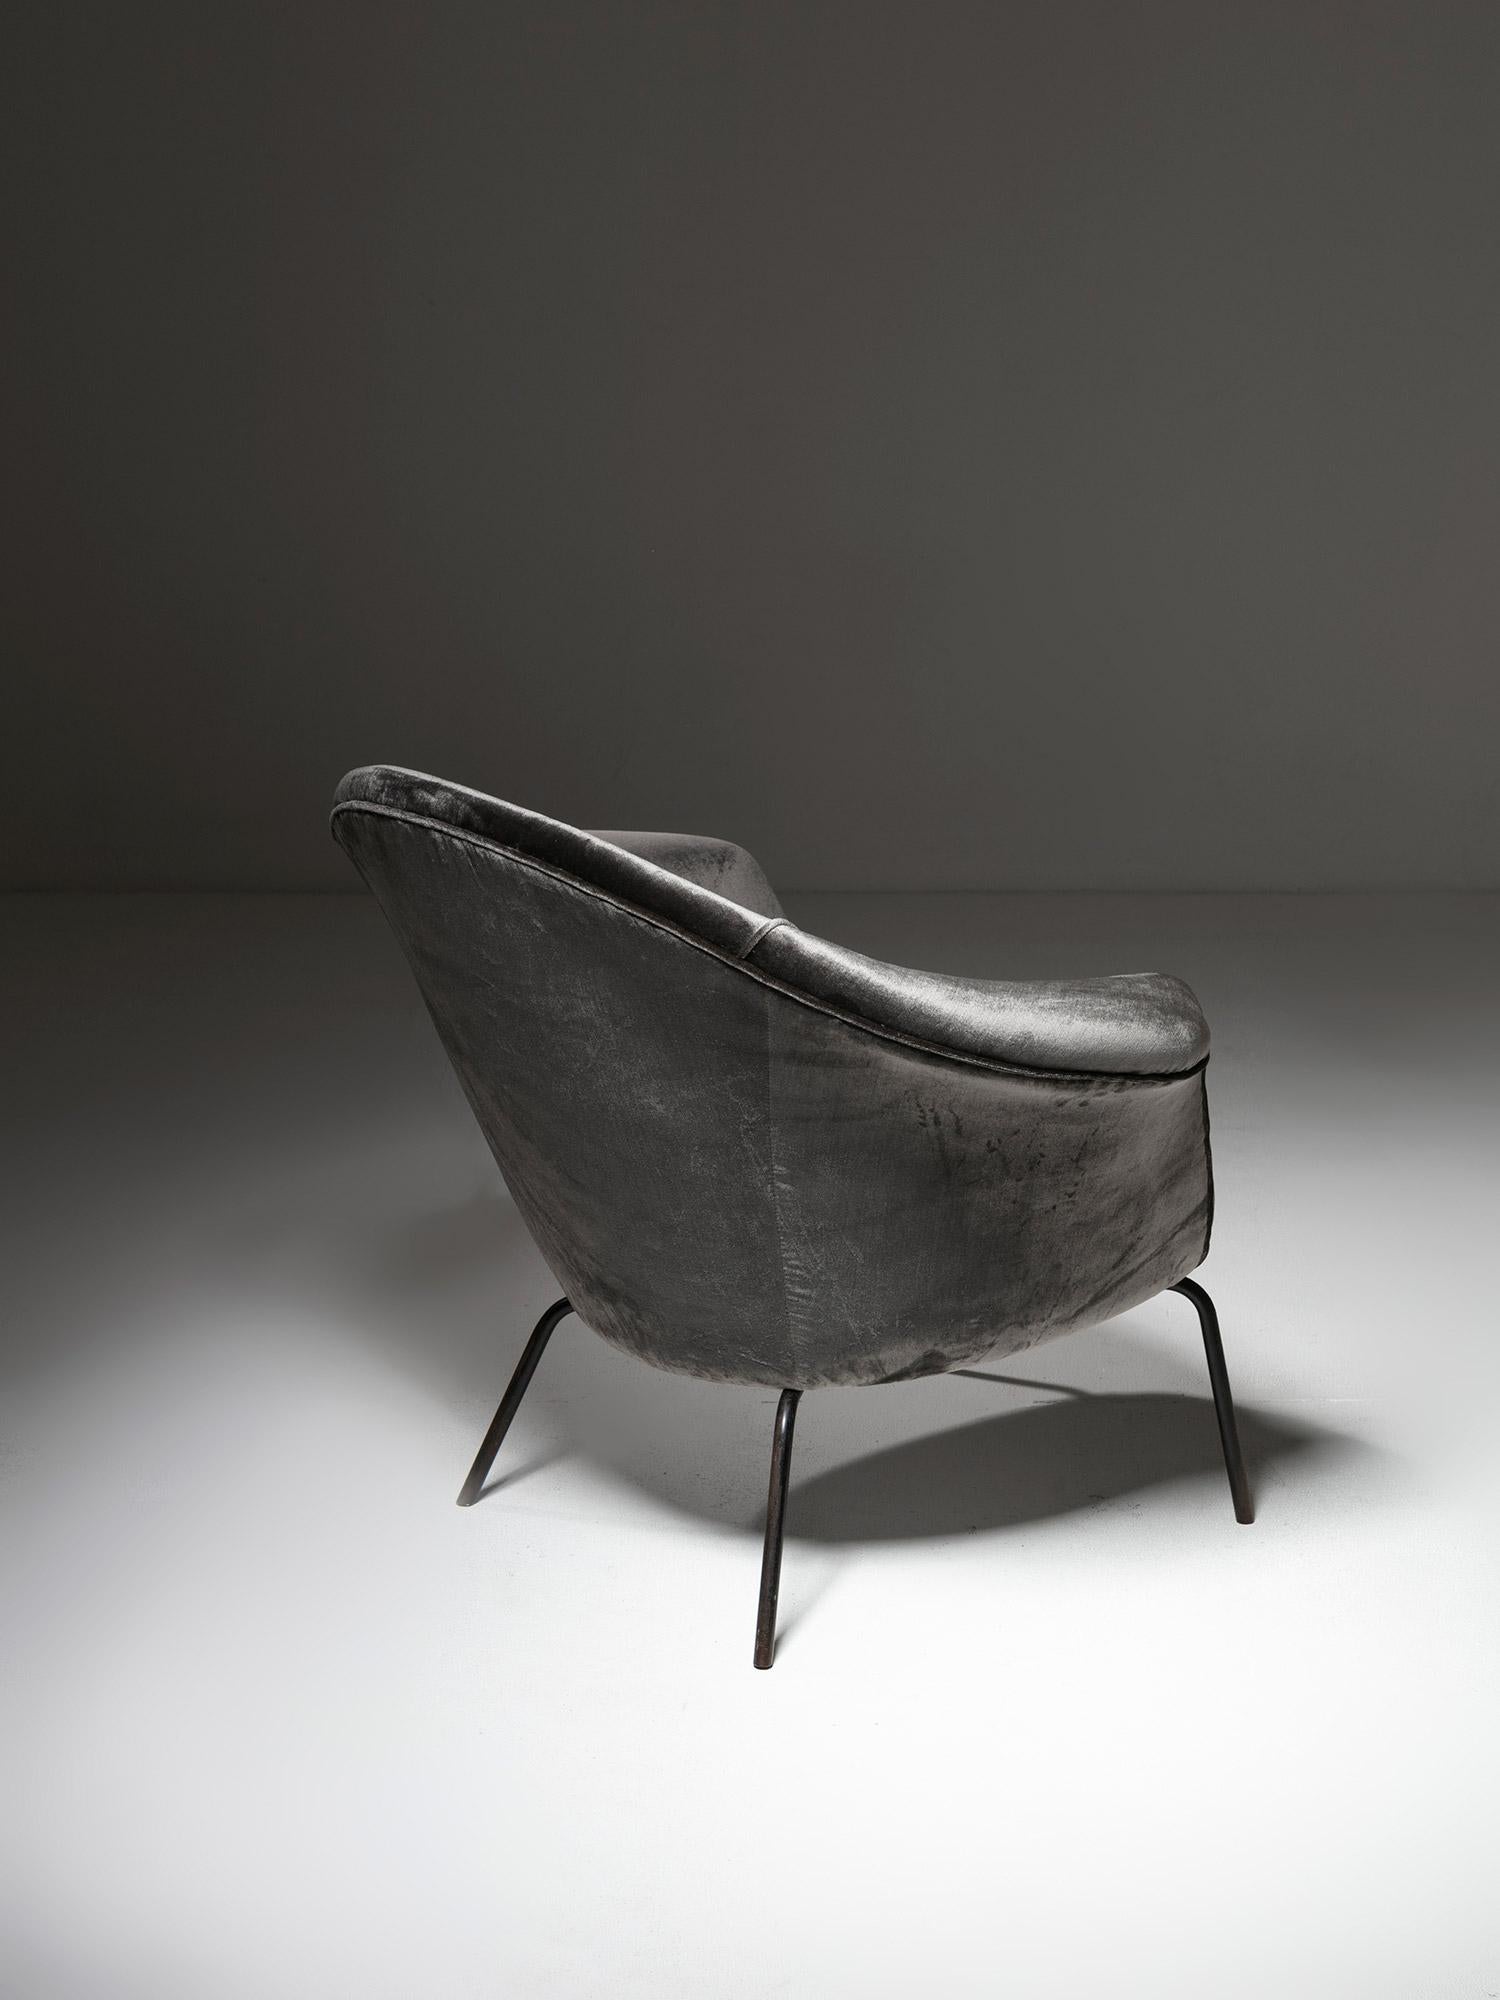 Mid-20th Century Velvet Lounge Chair Model 1003 by Henry W. Klein for Cassina, Italy, 1960s For Sale